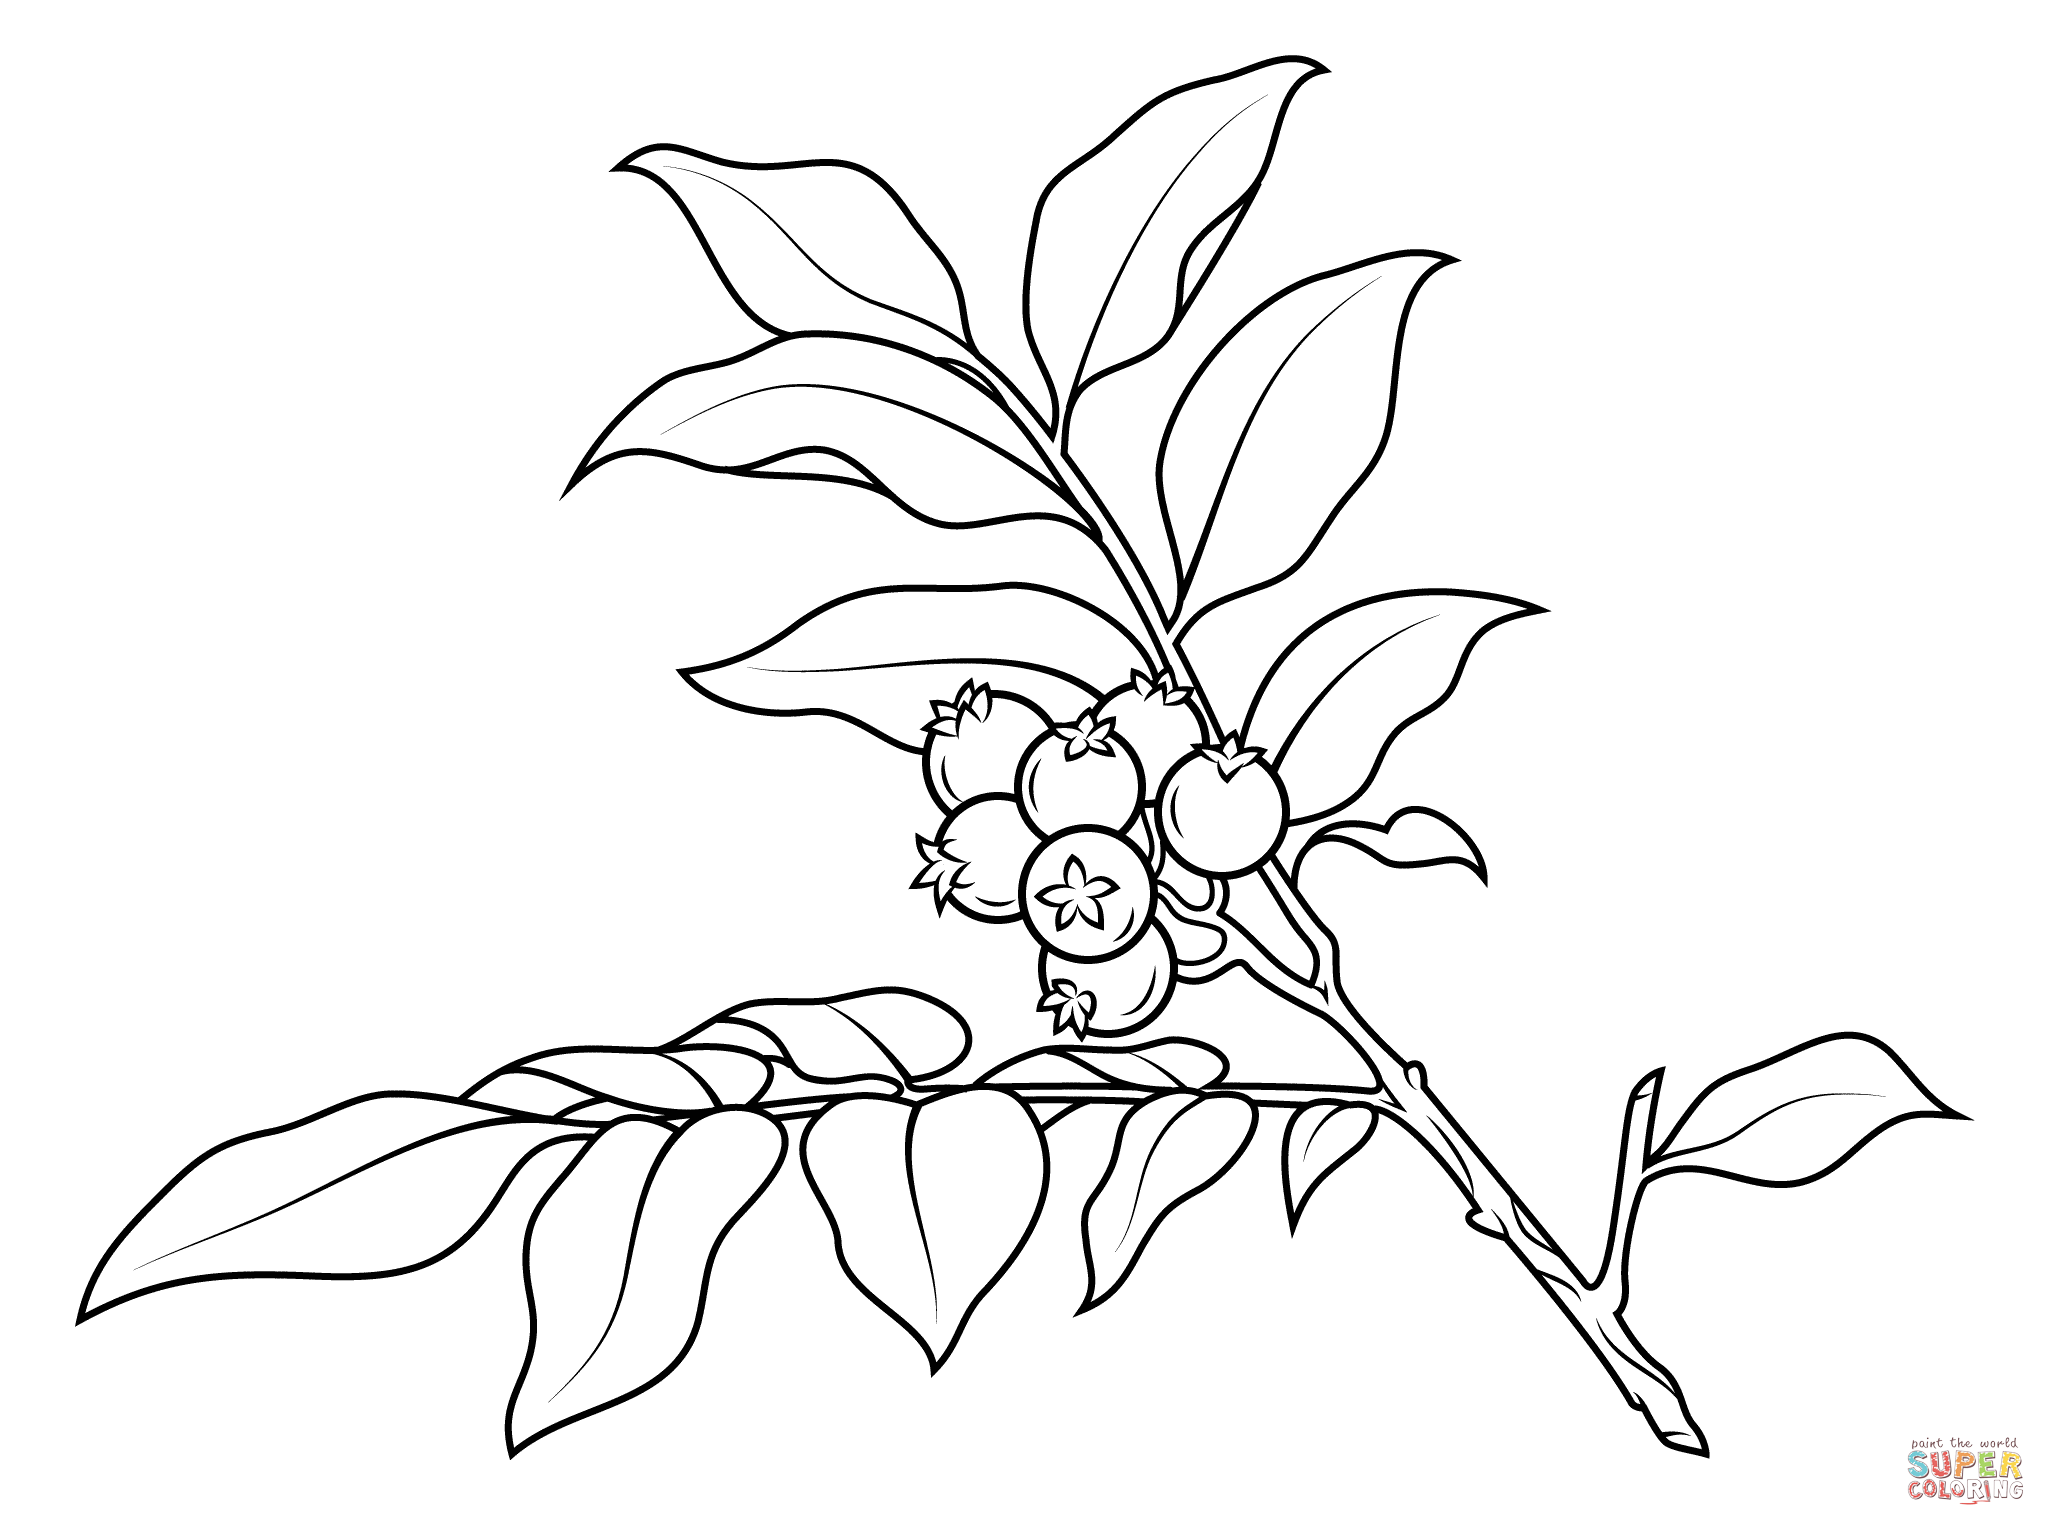 Branch coloring #1, Download drawings